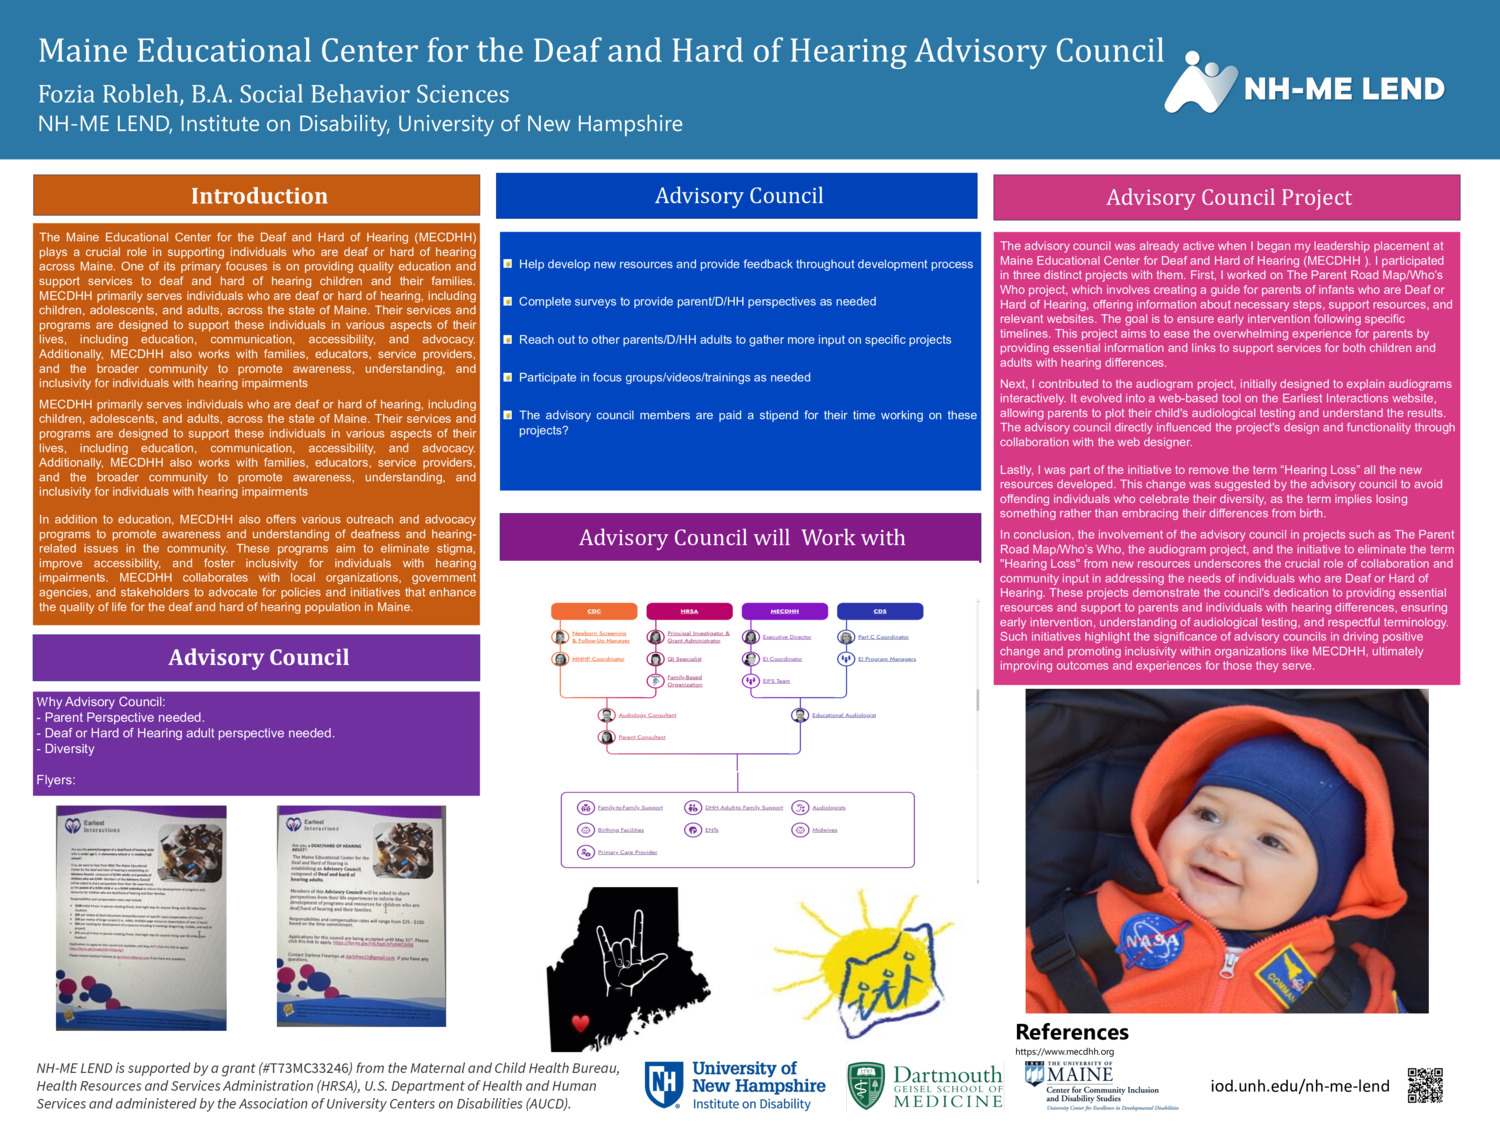 Maine Educational Center For The Deaf And Hard Of Hearing Advisory Council by Ou_bah